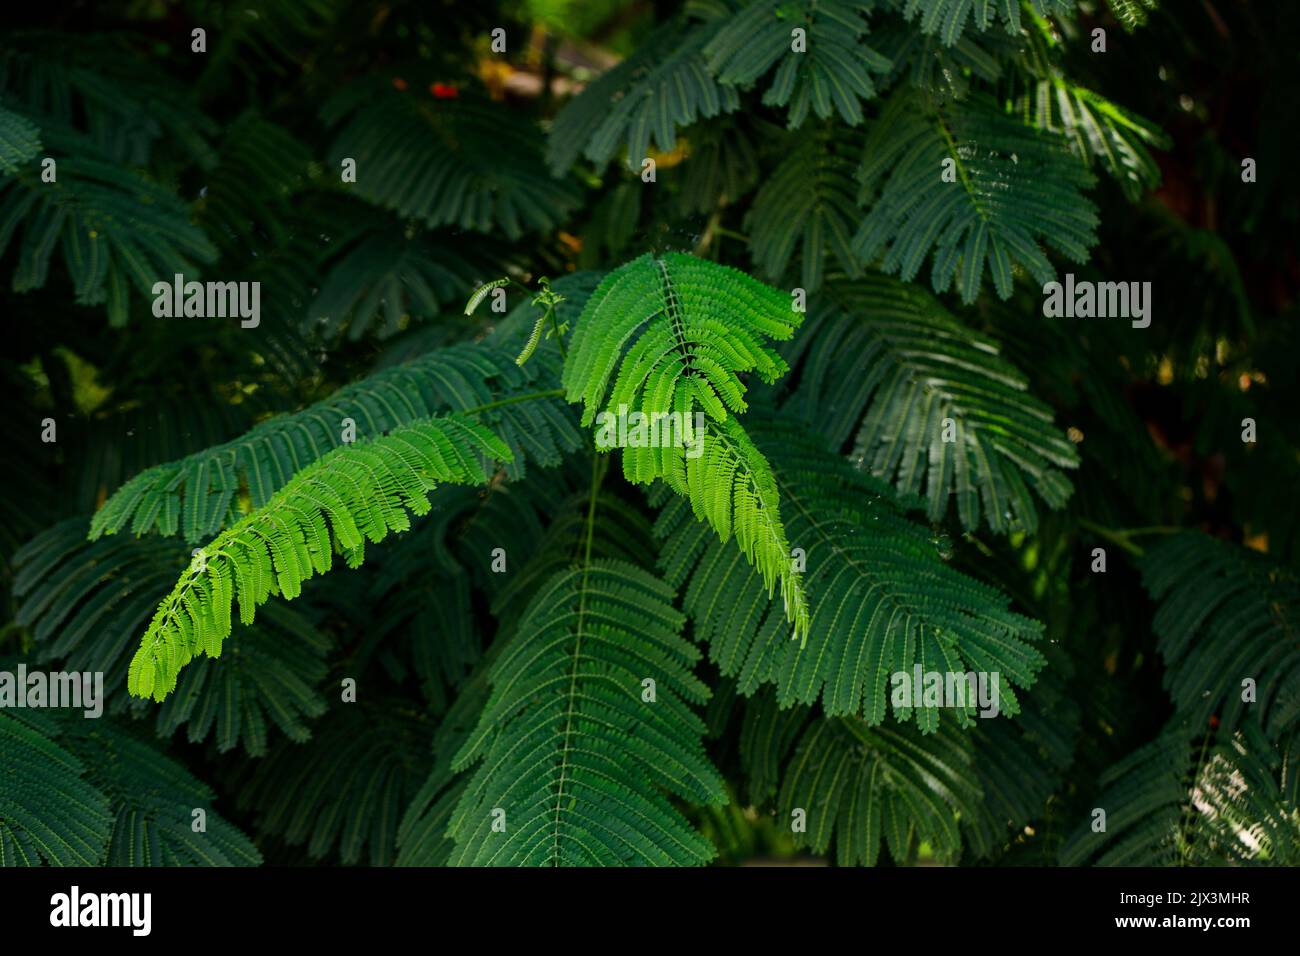 Tropical forest background, nature scene in green tone style, Stock Photo